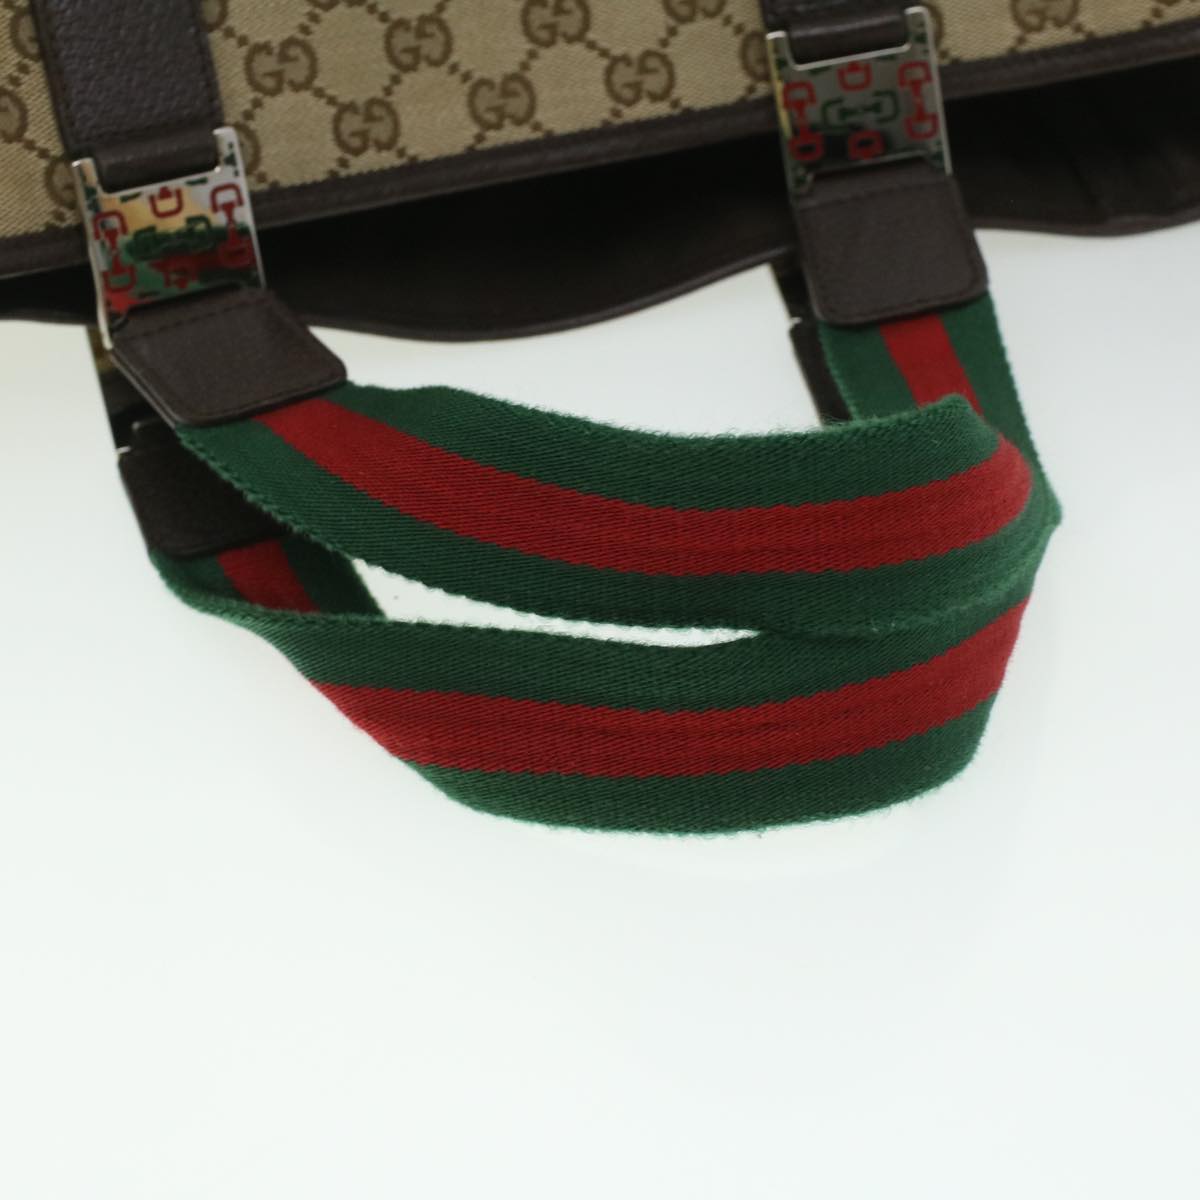 GUCCI GG Canvas Web Sherry Line Tote Bag Beige Red Green Auth ro581